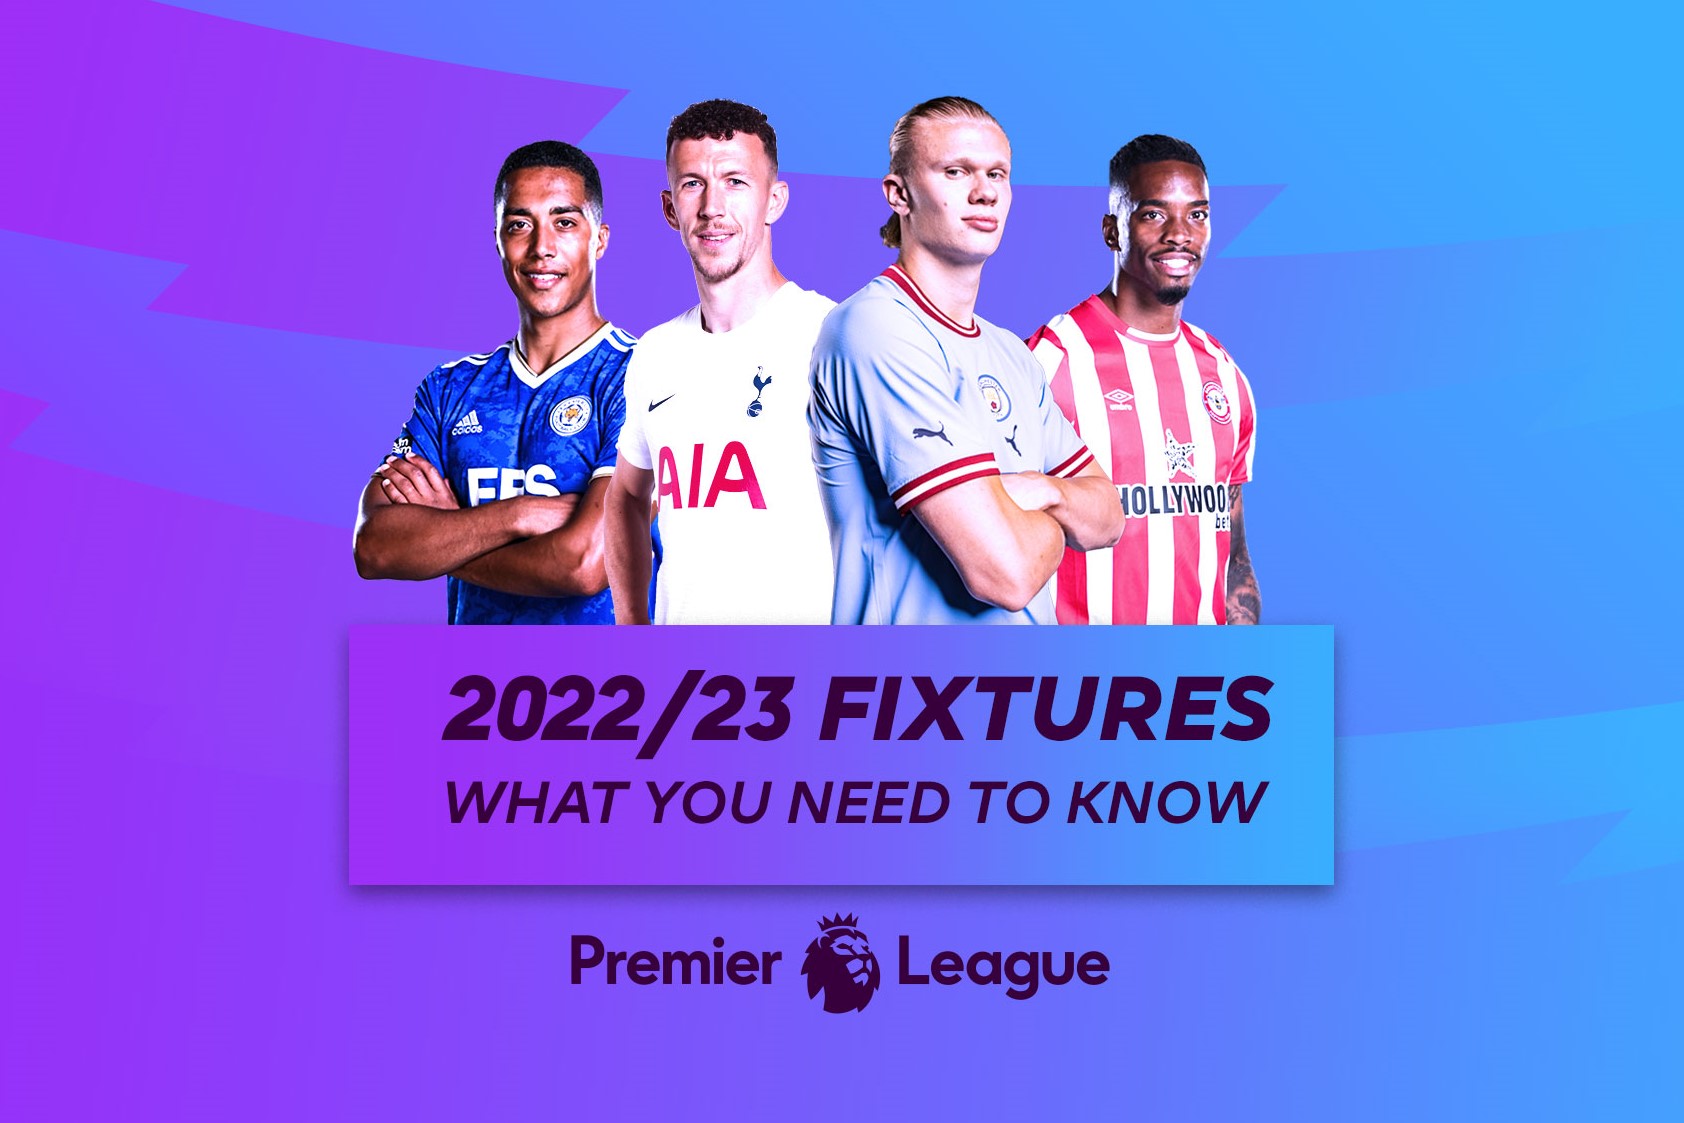 Are You Ready For The 2022 23 Premier League Fixtures?